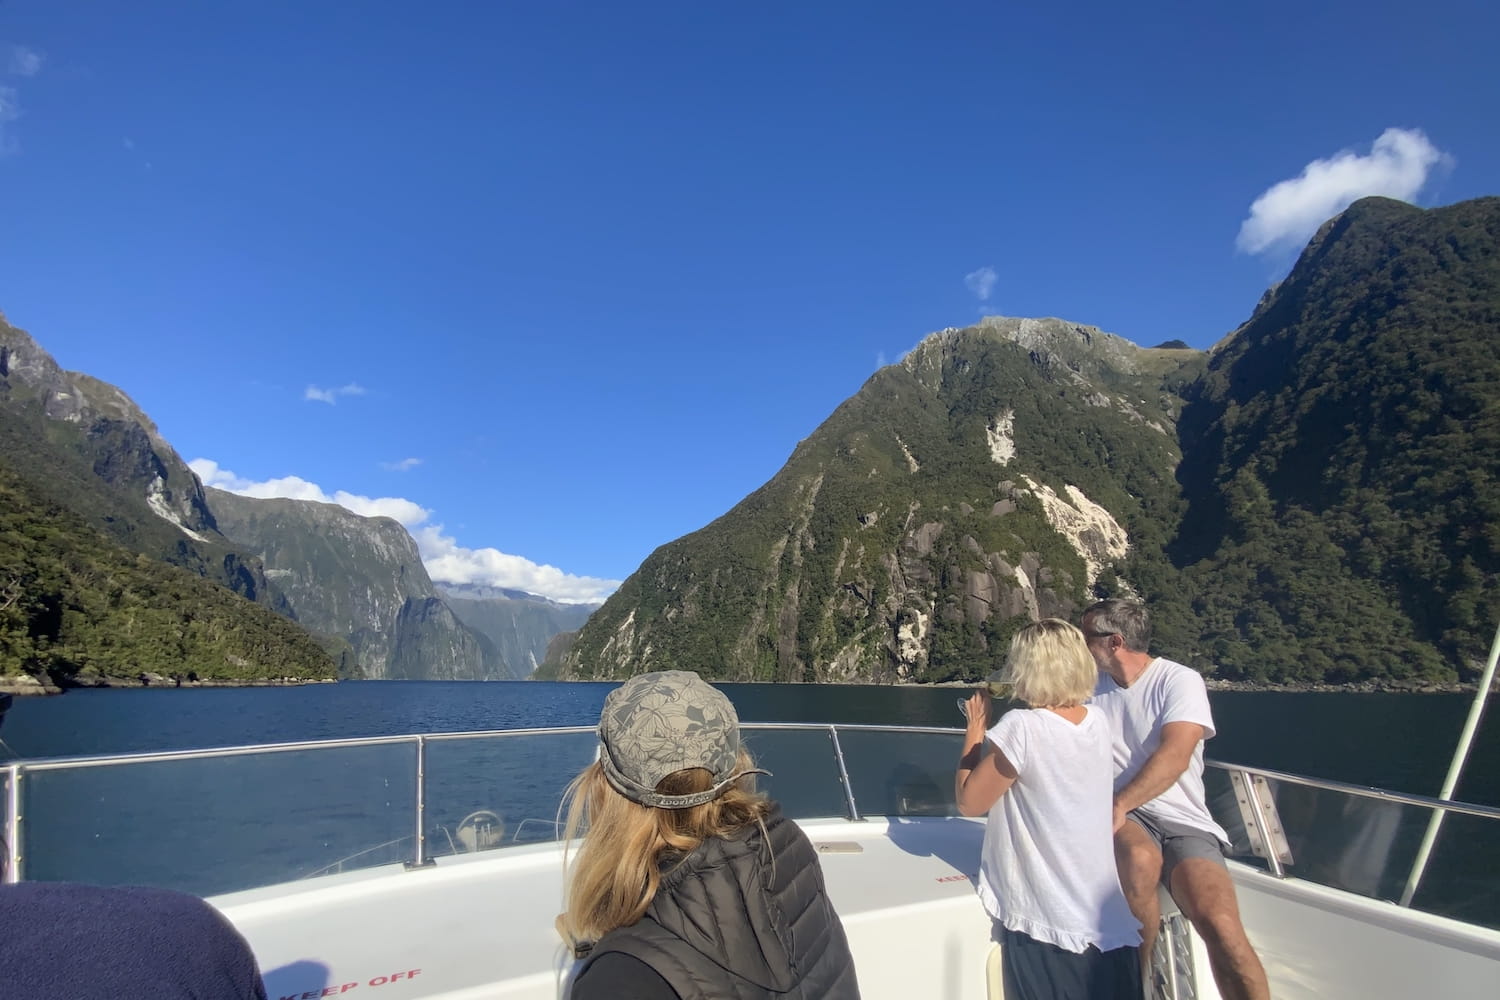 Incredible scenic beauty in the Fiordland National Park and Milford Sound